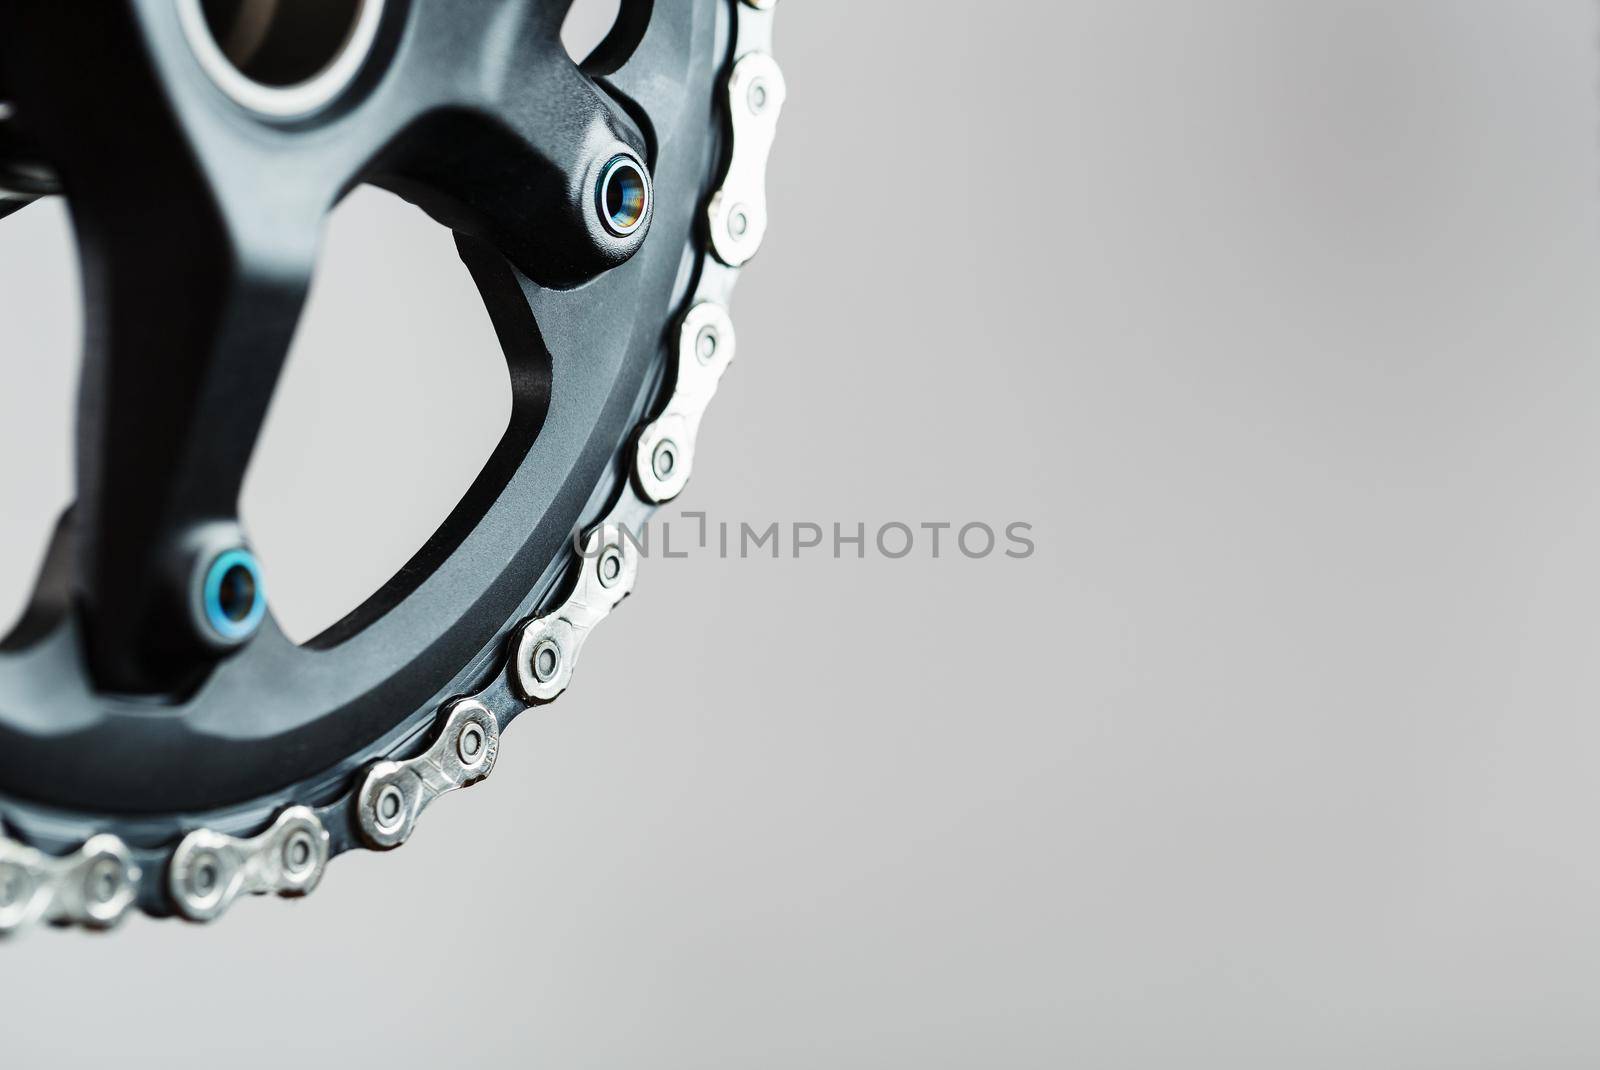 Bicycle crank system with chain close-up, mechanism for repair and tuning